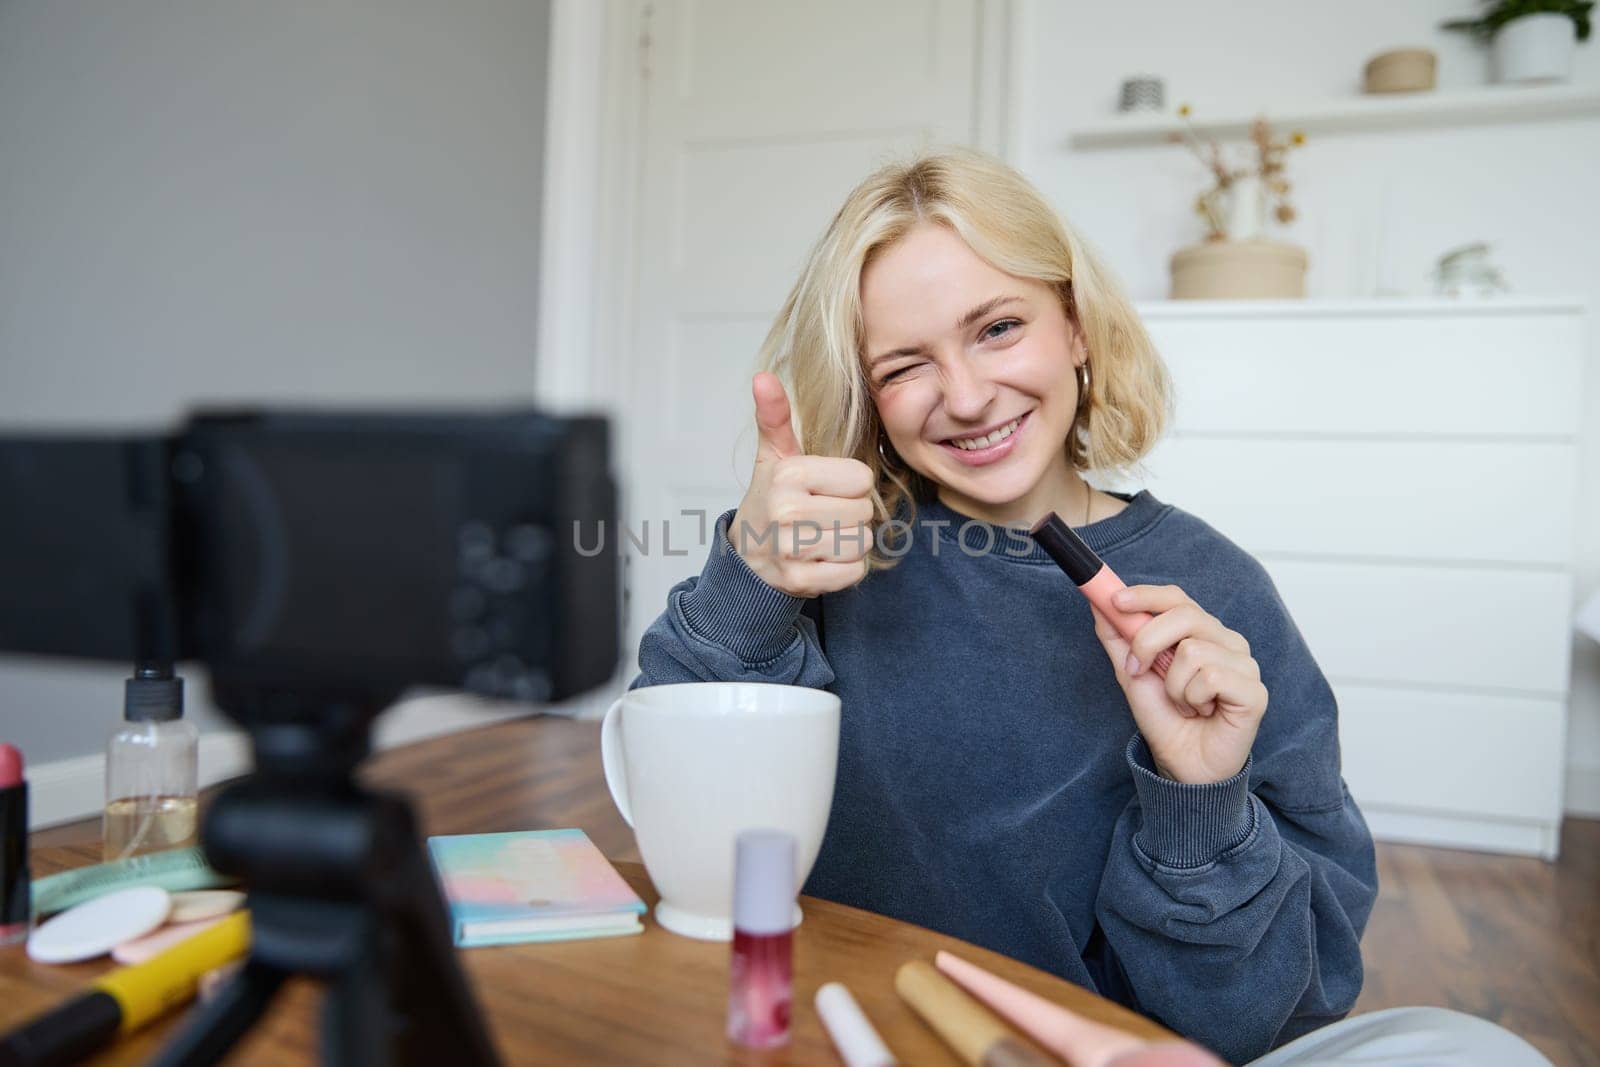 Portrait of smiling, beautiful young woman, lifestyle blogger recording a video in her room, sitting in front of camera on stabiliser, showing thumbs up and wink face, recommending mascara.